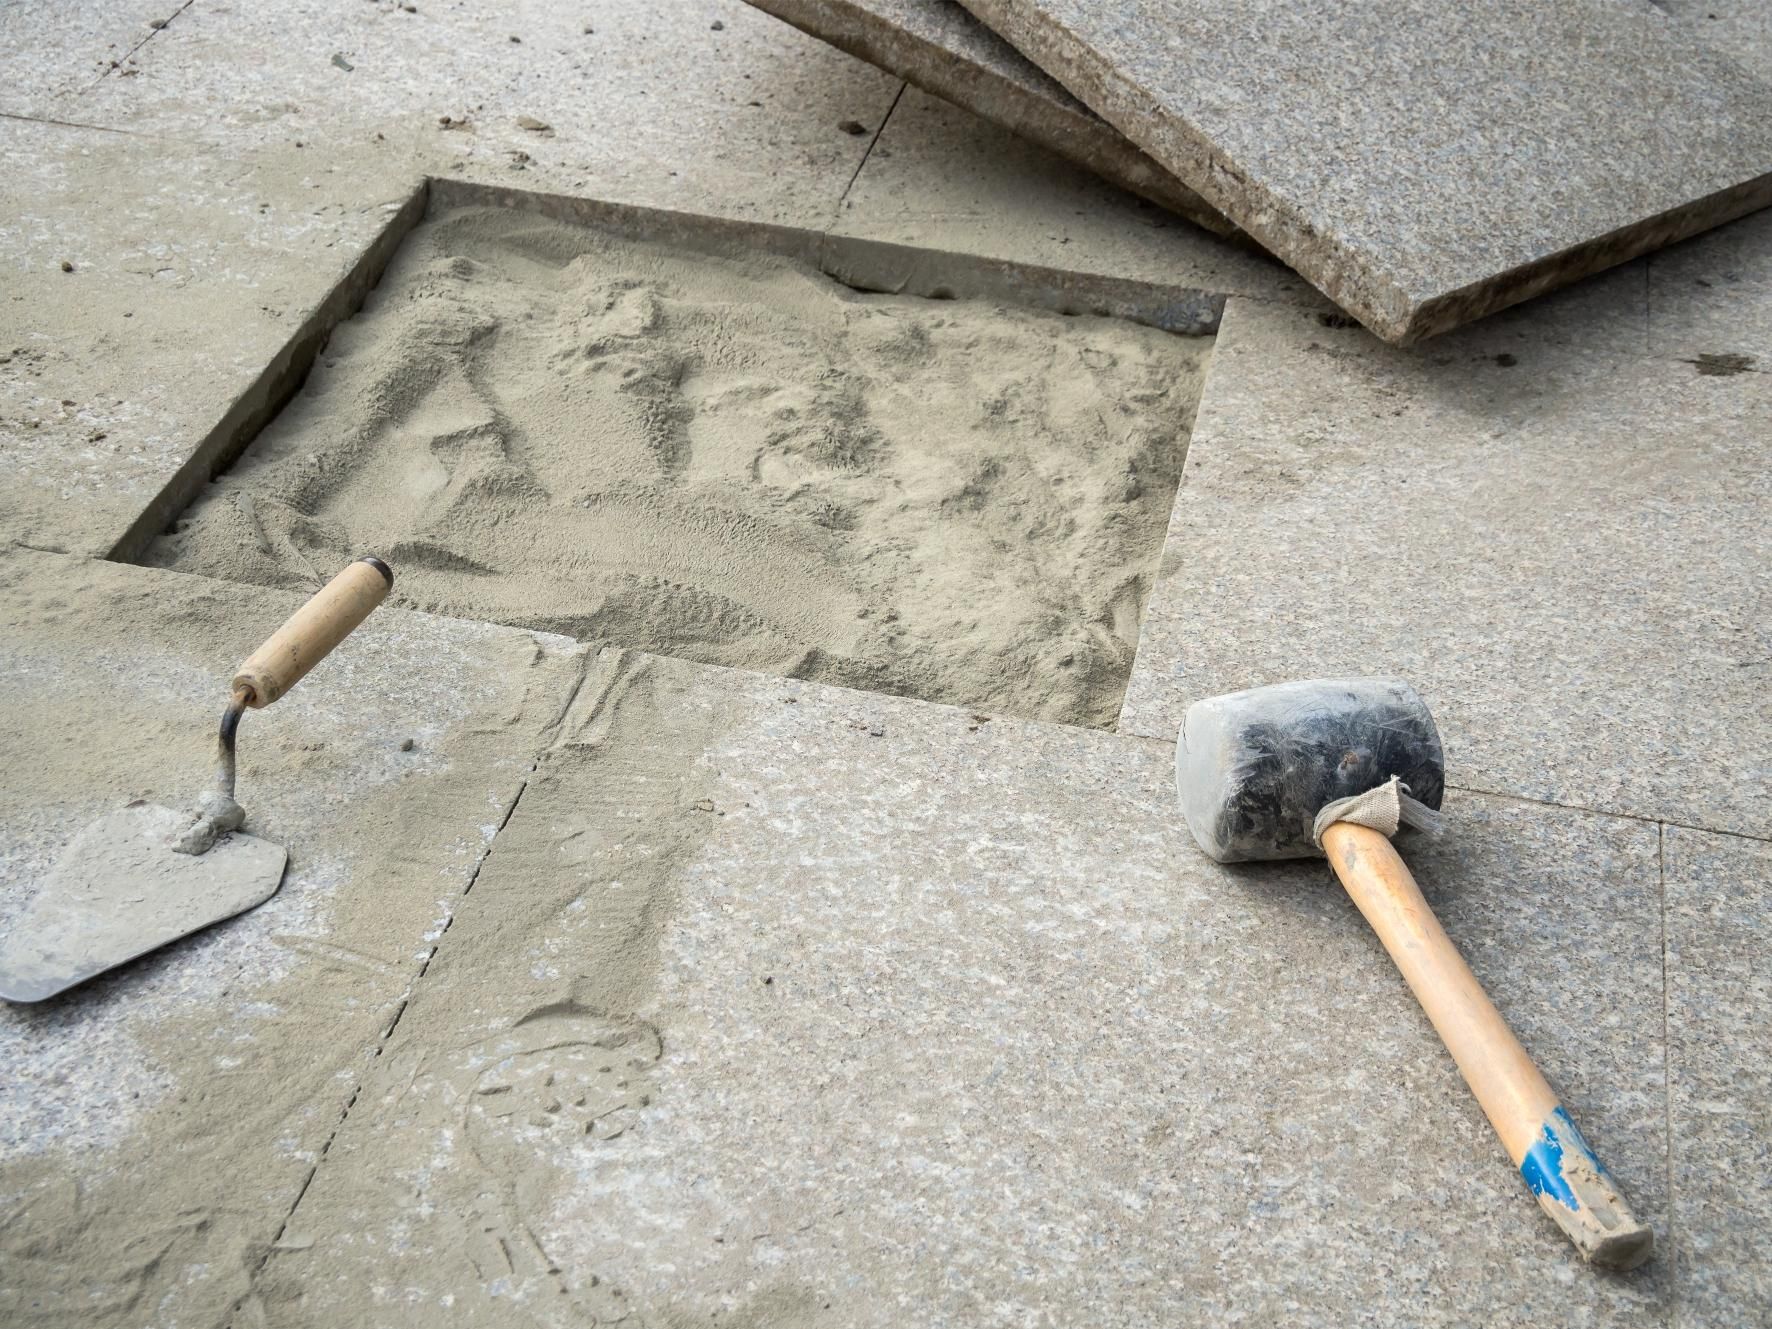 a trowel and a rubber mallet are laying on a concrete floor .